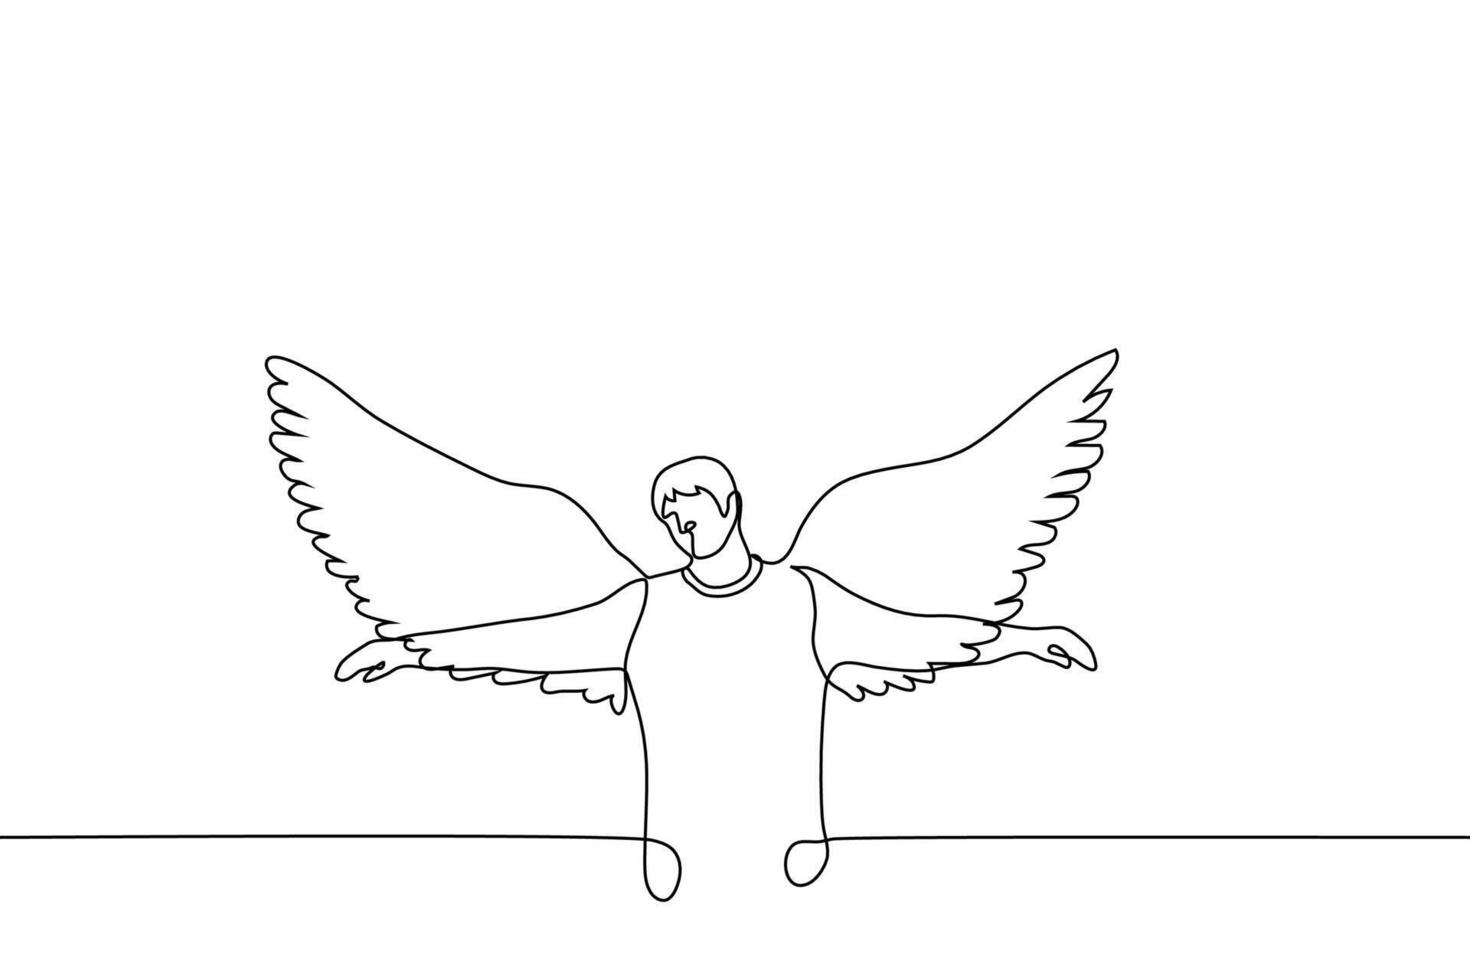 man with wings is standing with his wings spread and his arms to the sides - one line drawing vector. angel concept metaphor of dreamy person, free thinking person vector